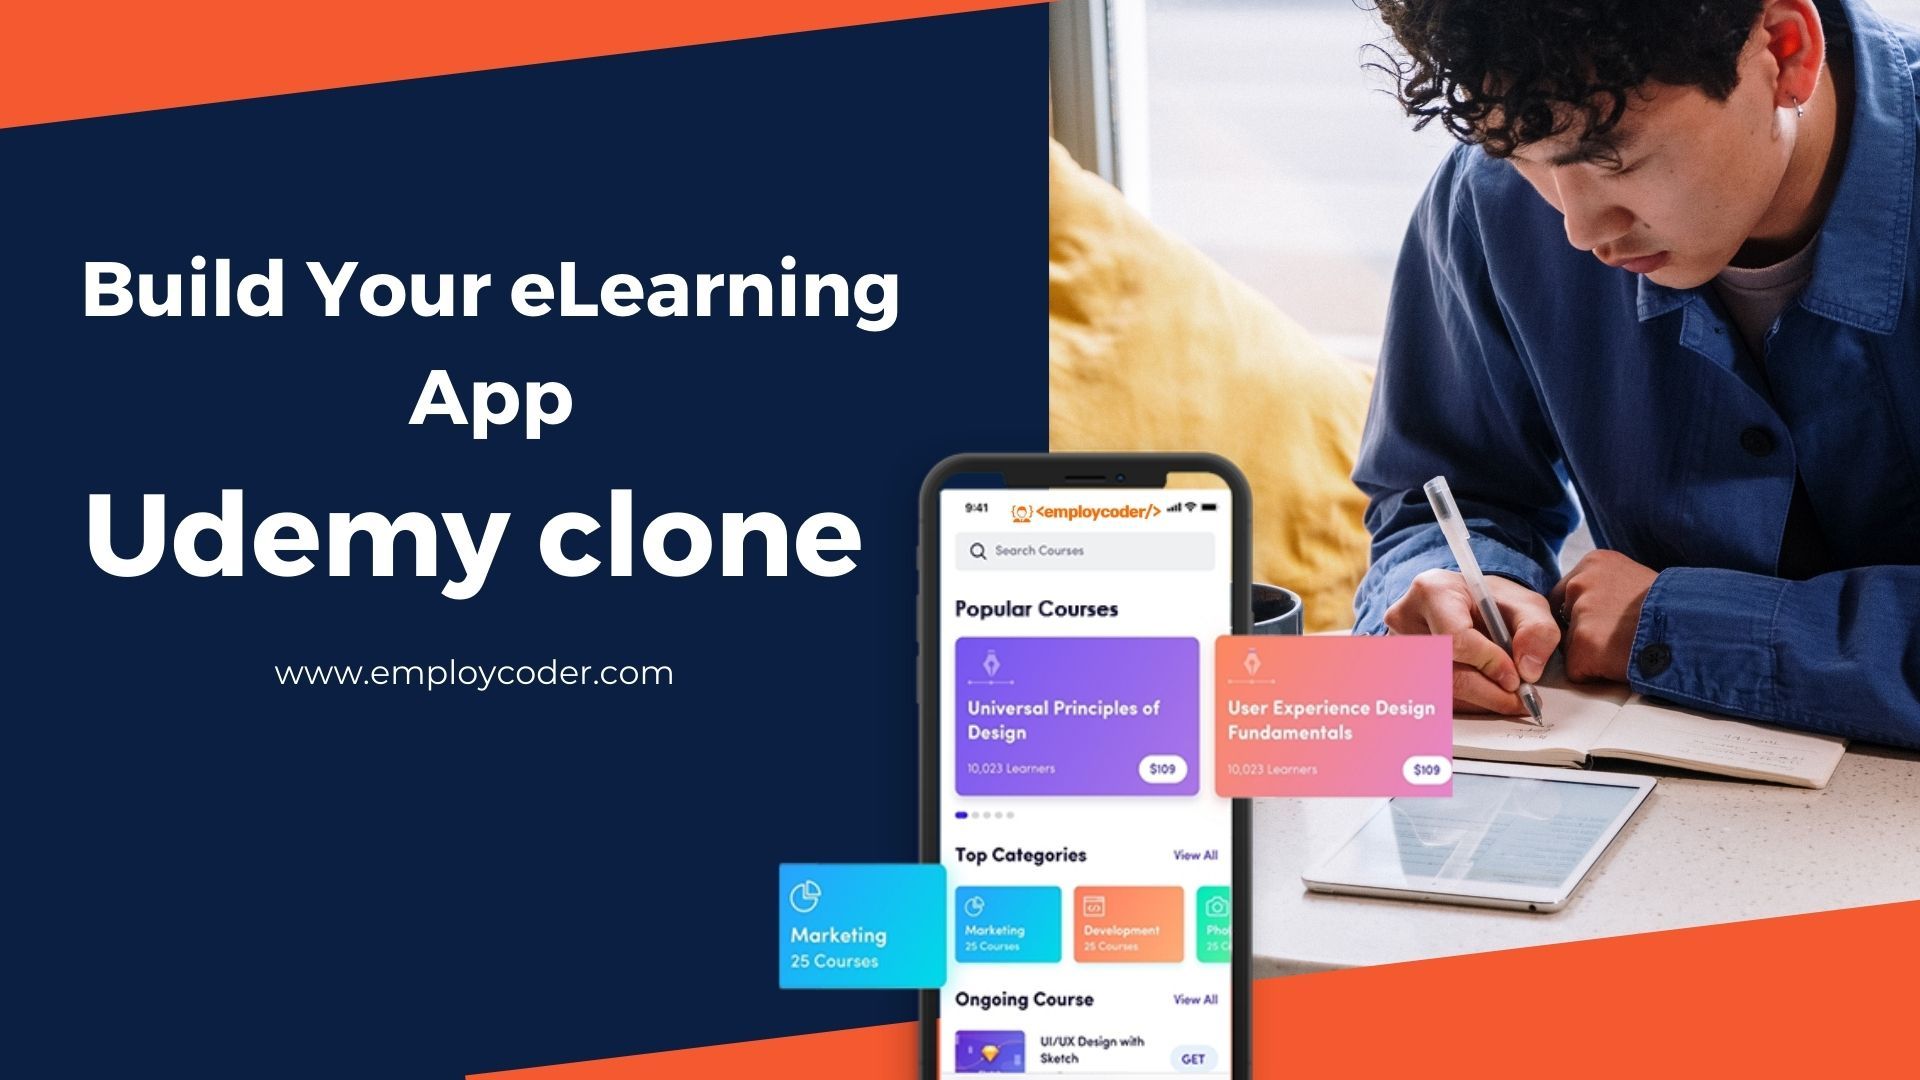 Launch your own E-learning platform like udemy clone app